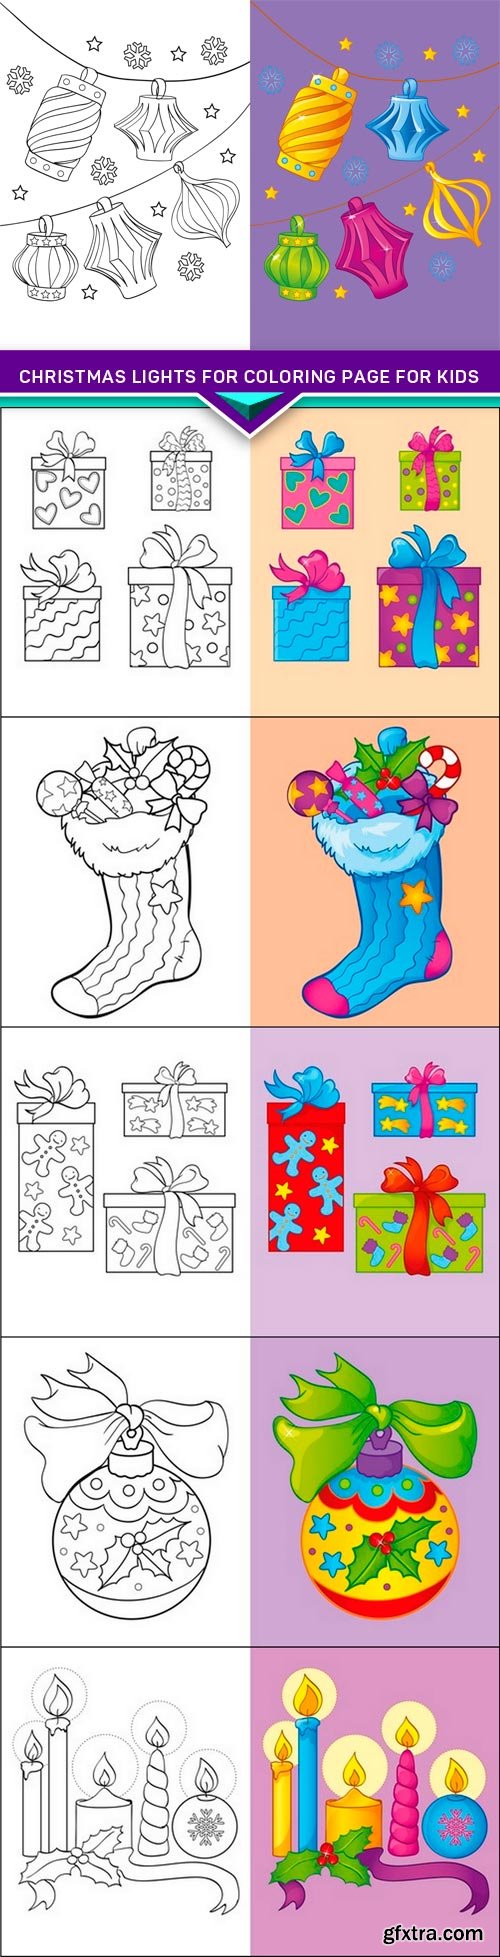 Christmas lights for coloring page for kids 6X EPS